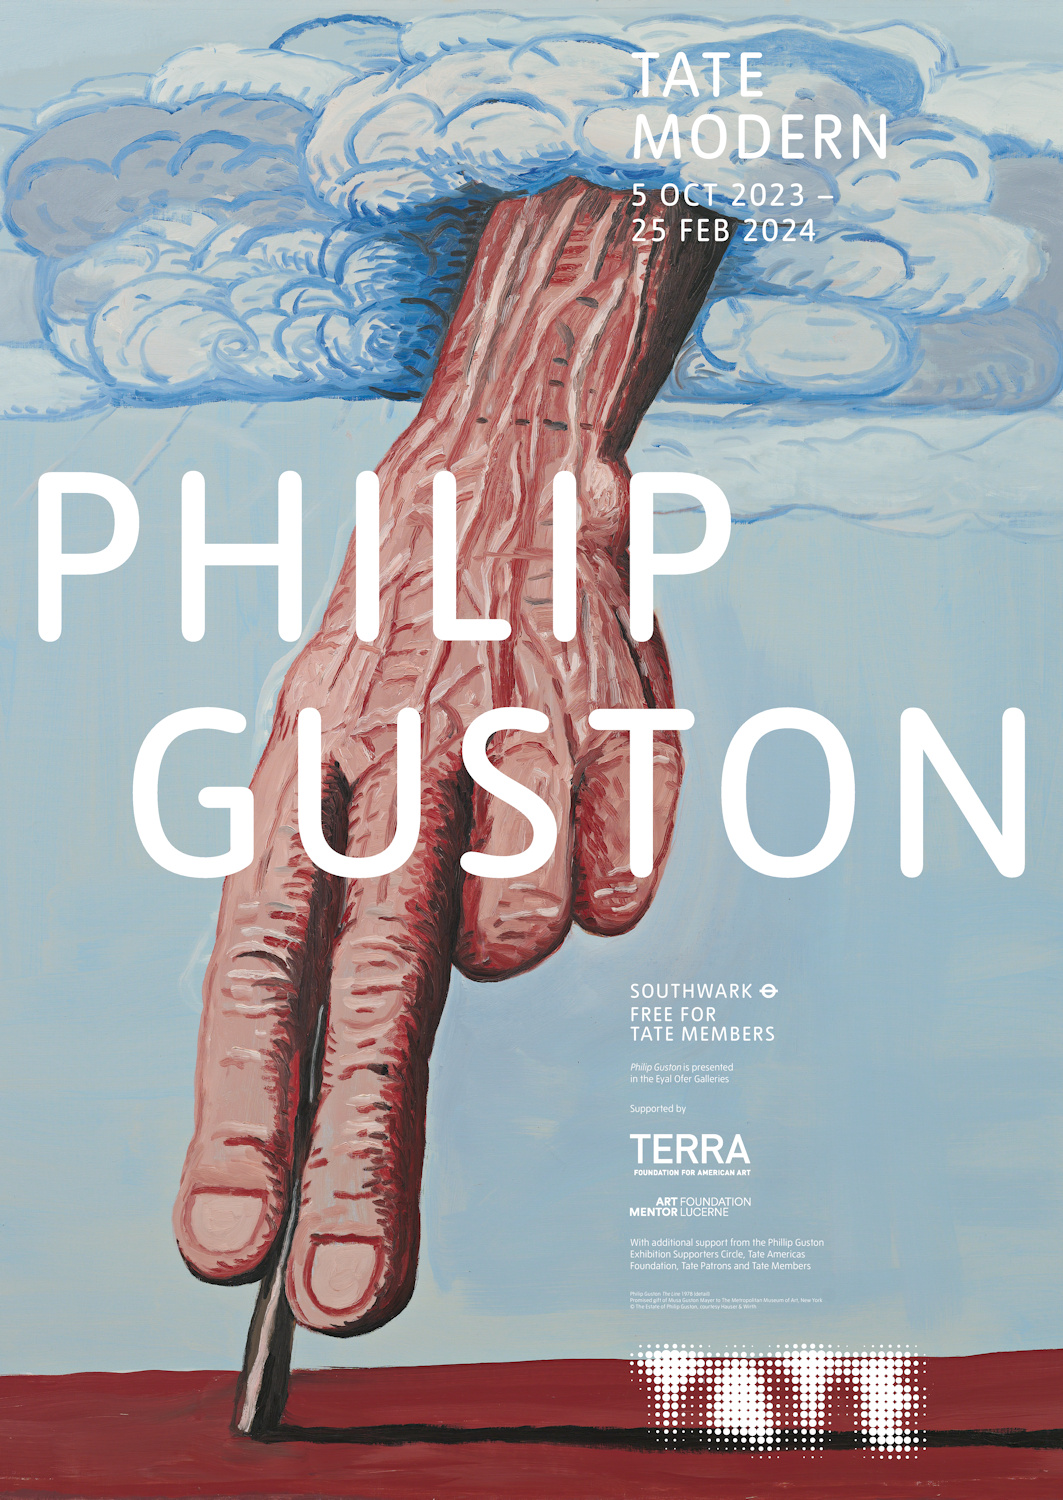 TM EXH 0089 Philip Guston_A2_approved_highres_AW